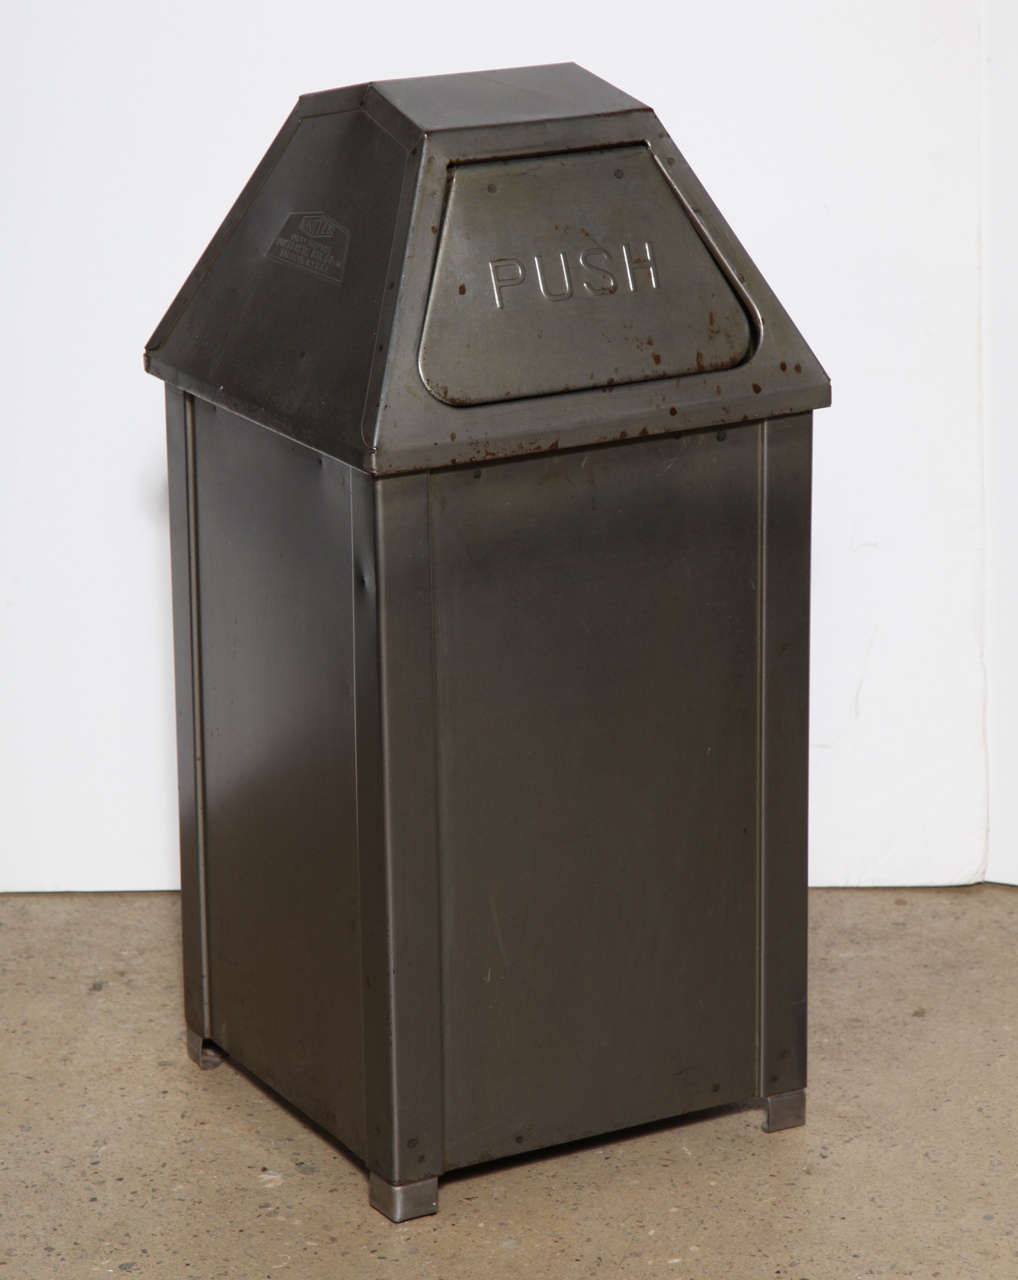 Two rare, classic, smaller vintage Double Sided Swing Dome Top Sanitary Cans. Featuring PUSH lettering on two-sided Steel push lid with removable liner. These downsized municipal Waste Cans are perfect for home use. Useful option for providing two